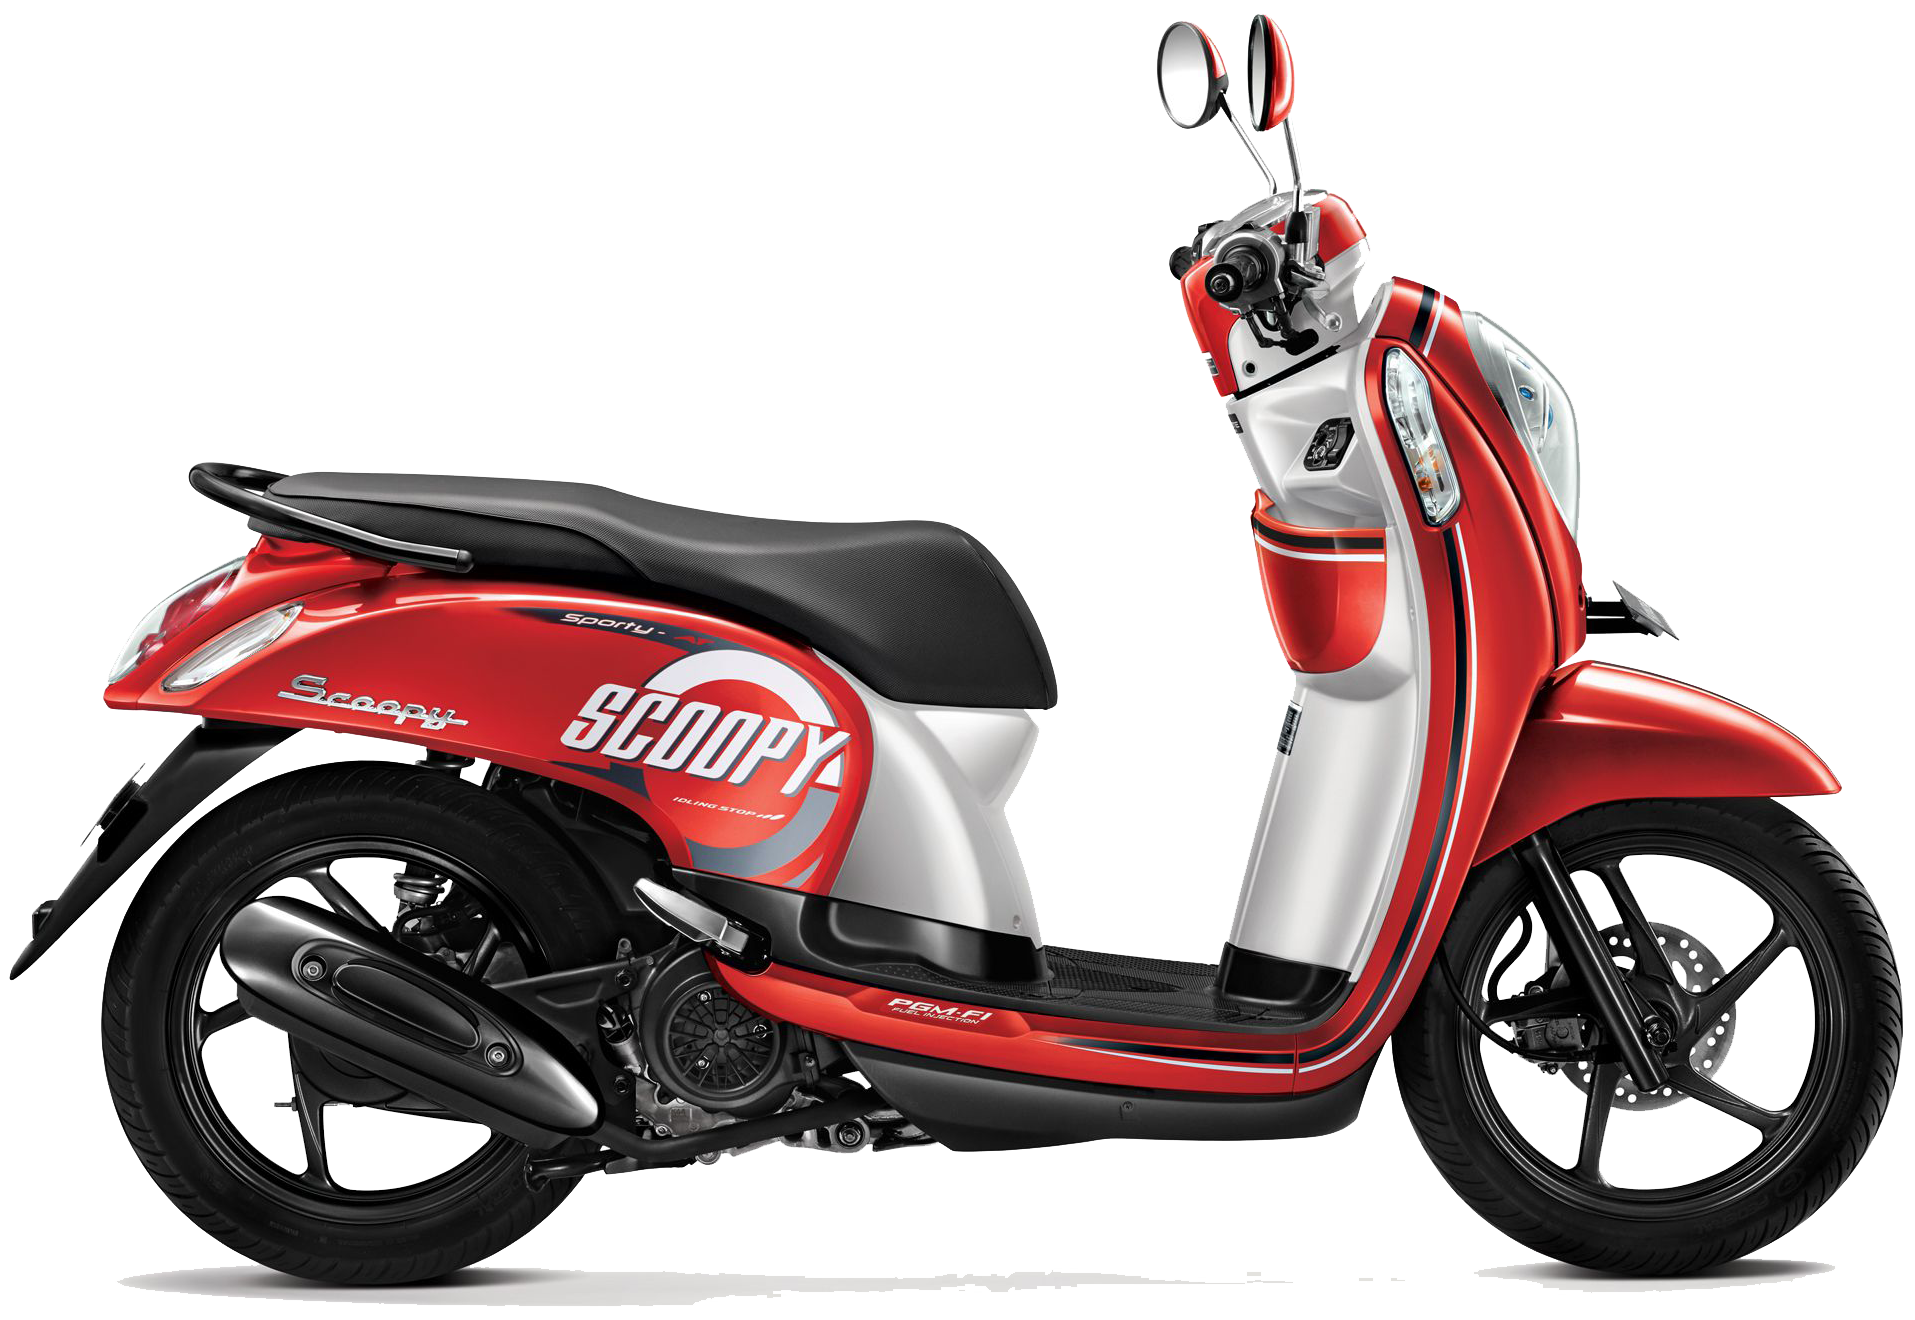 Scoopy Car Scooter Honda Motorcycle Motorized PNG Image